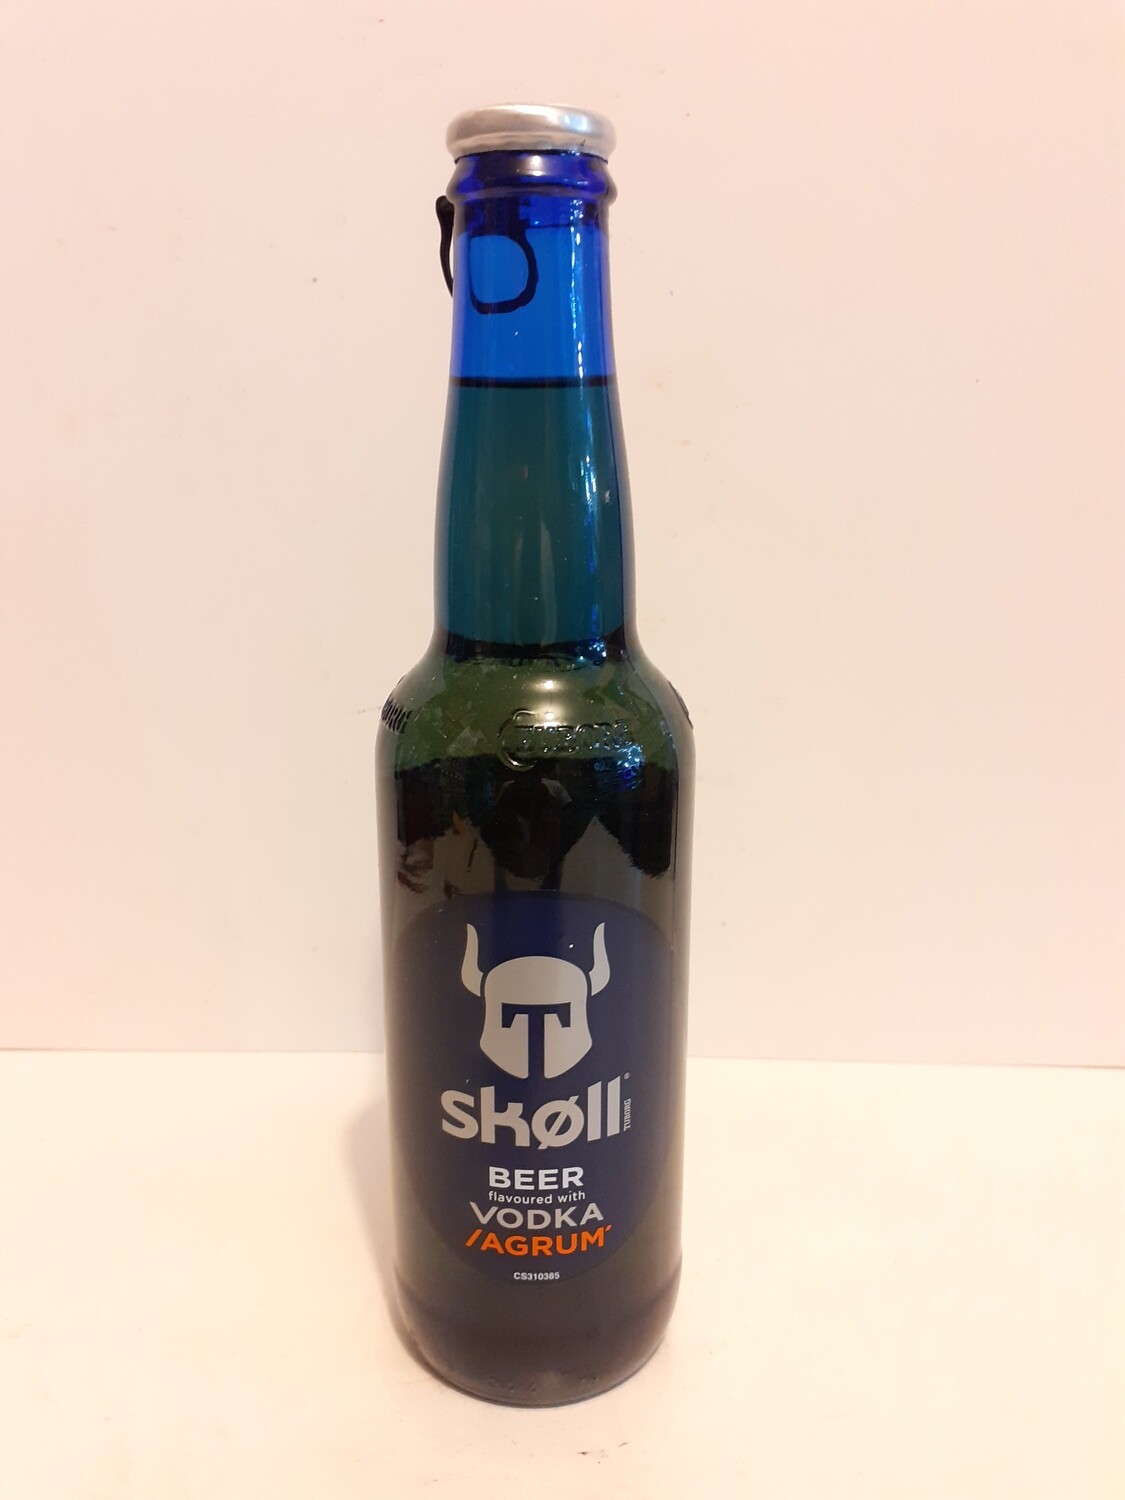 Beer flavoured with Vodka SKOLL 33 cl/6,0 % alc